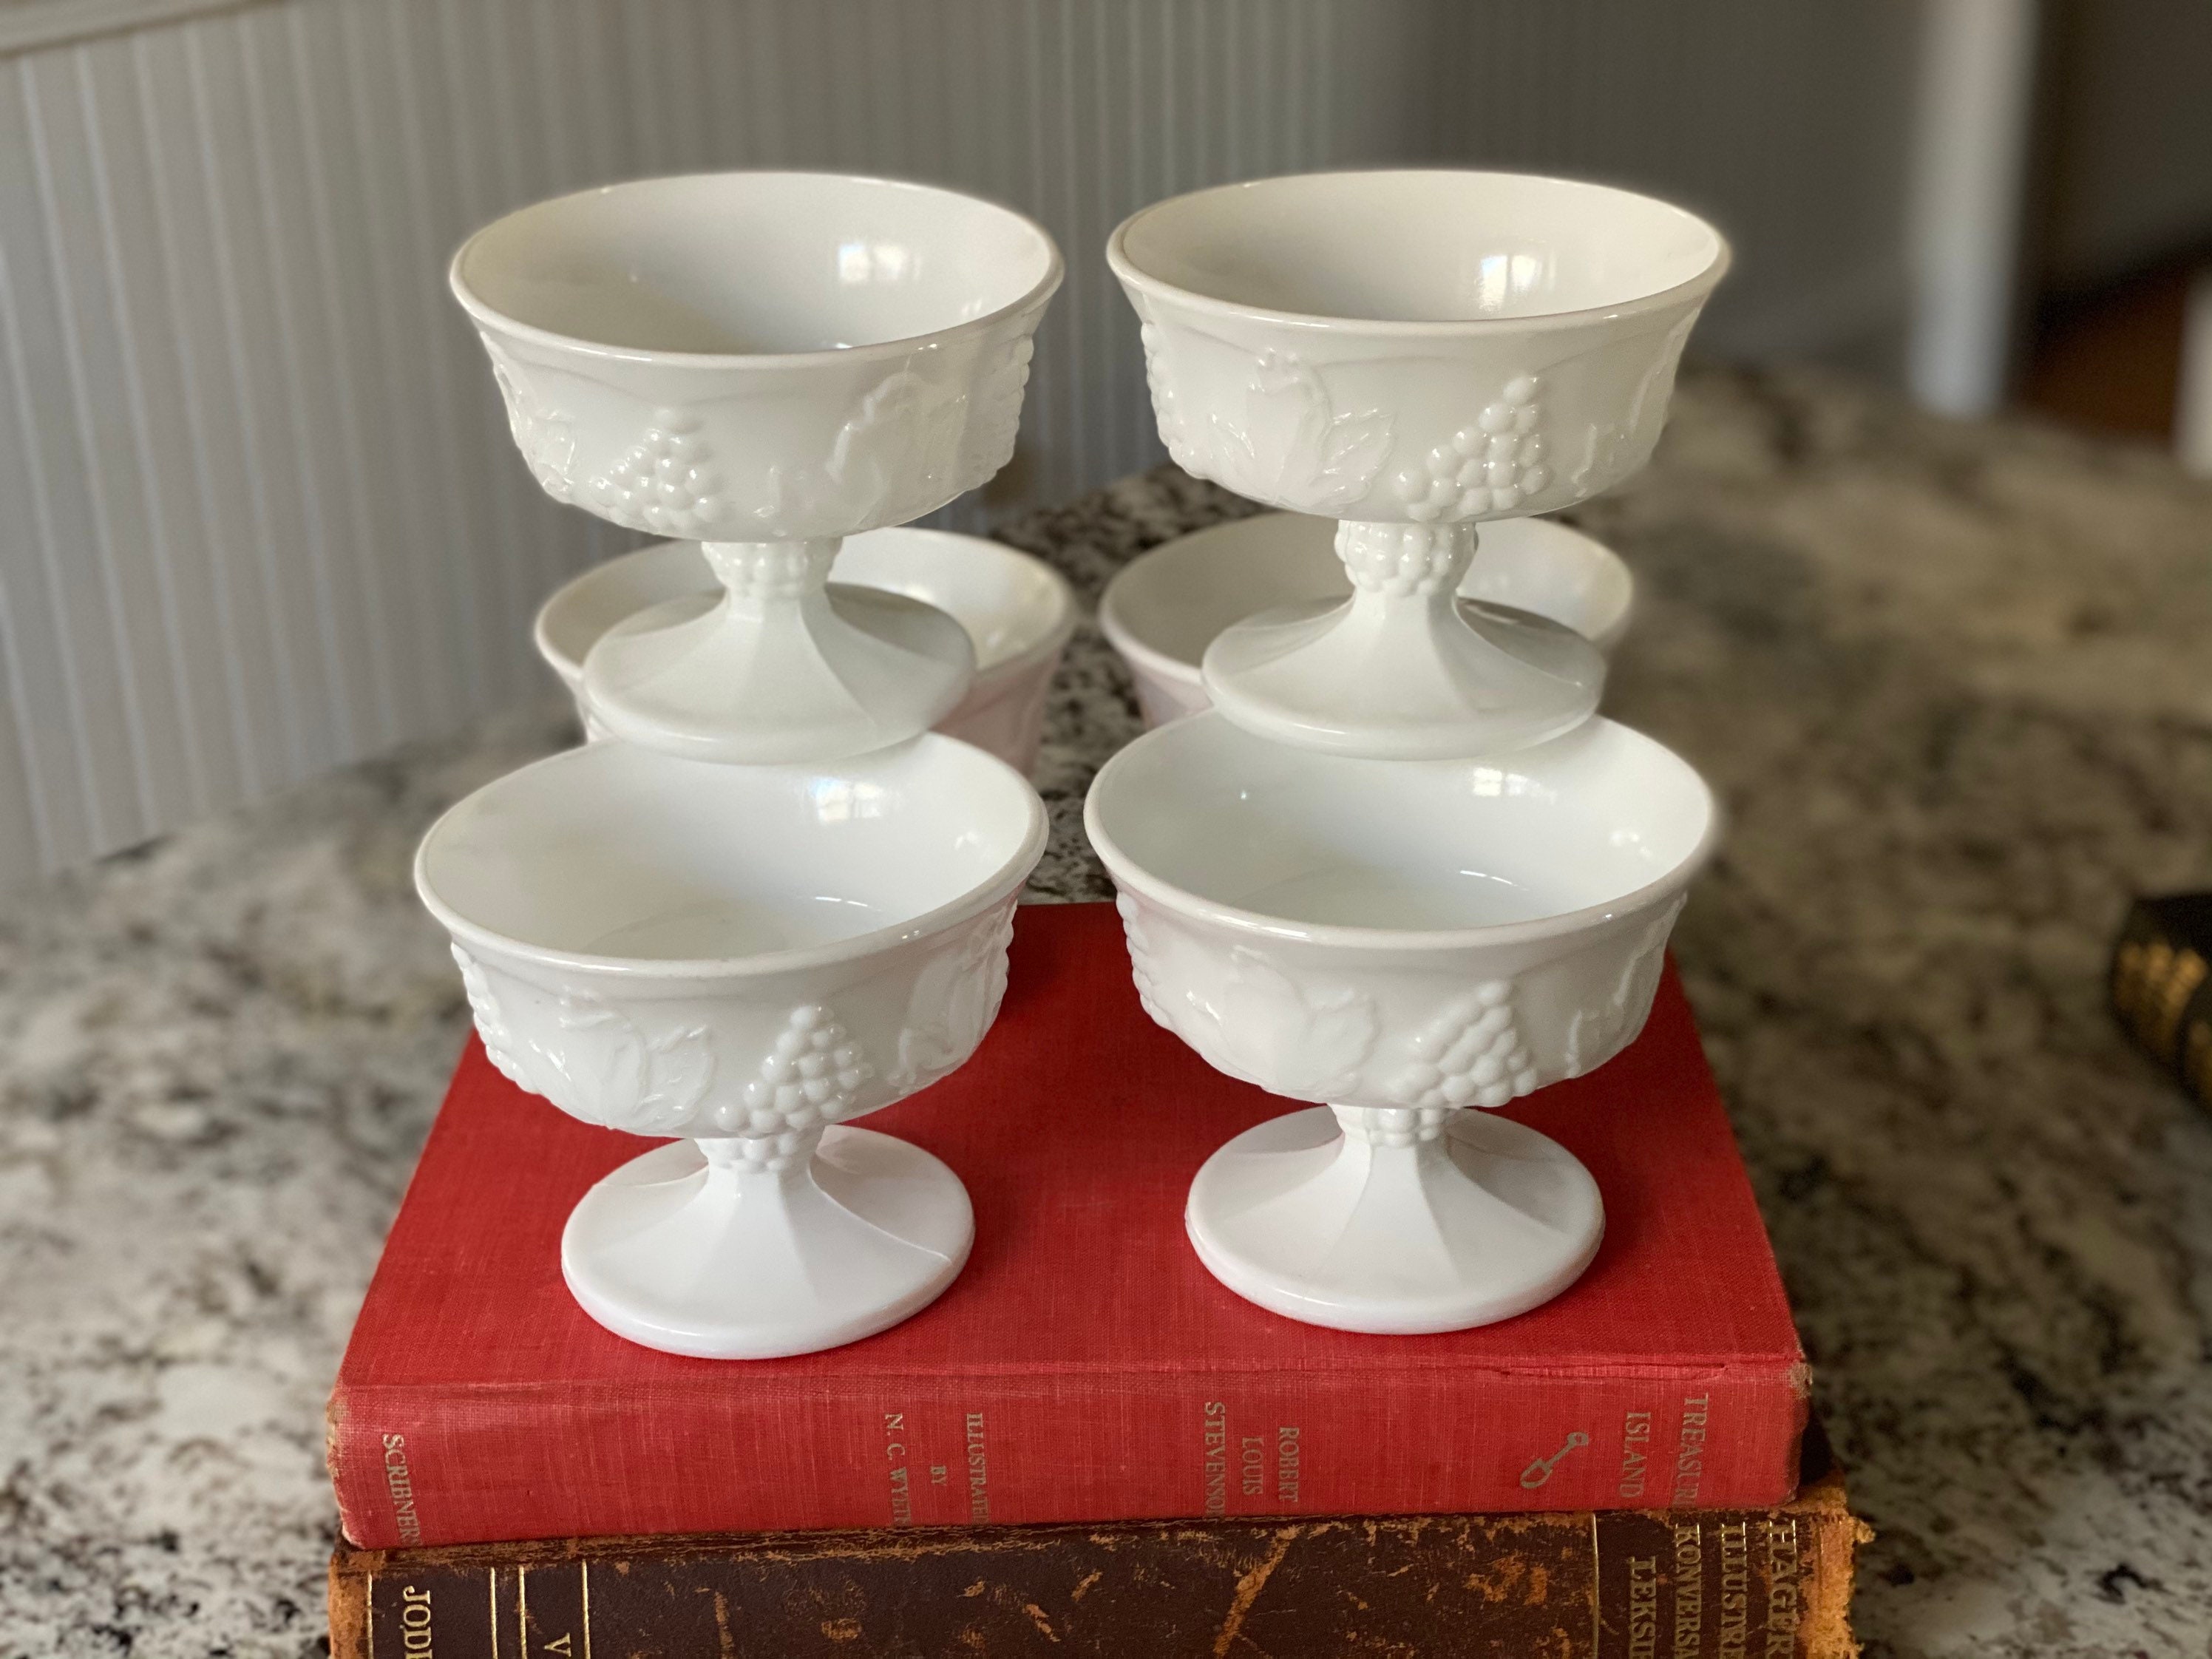 Vintage Milk Glass Grape Pattern Footed Sorbet Coupes Mini Compotes or  Dessert Cups 